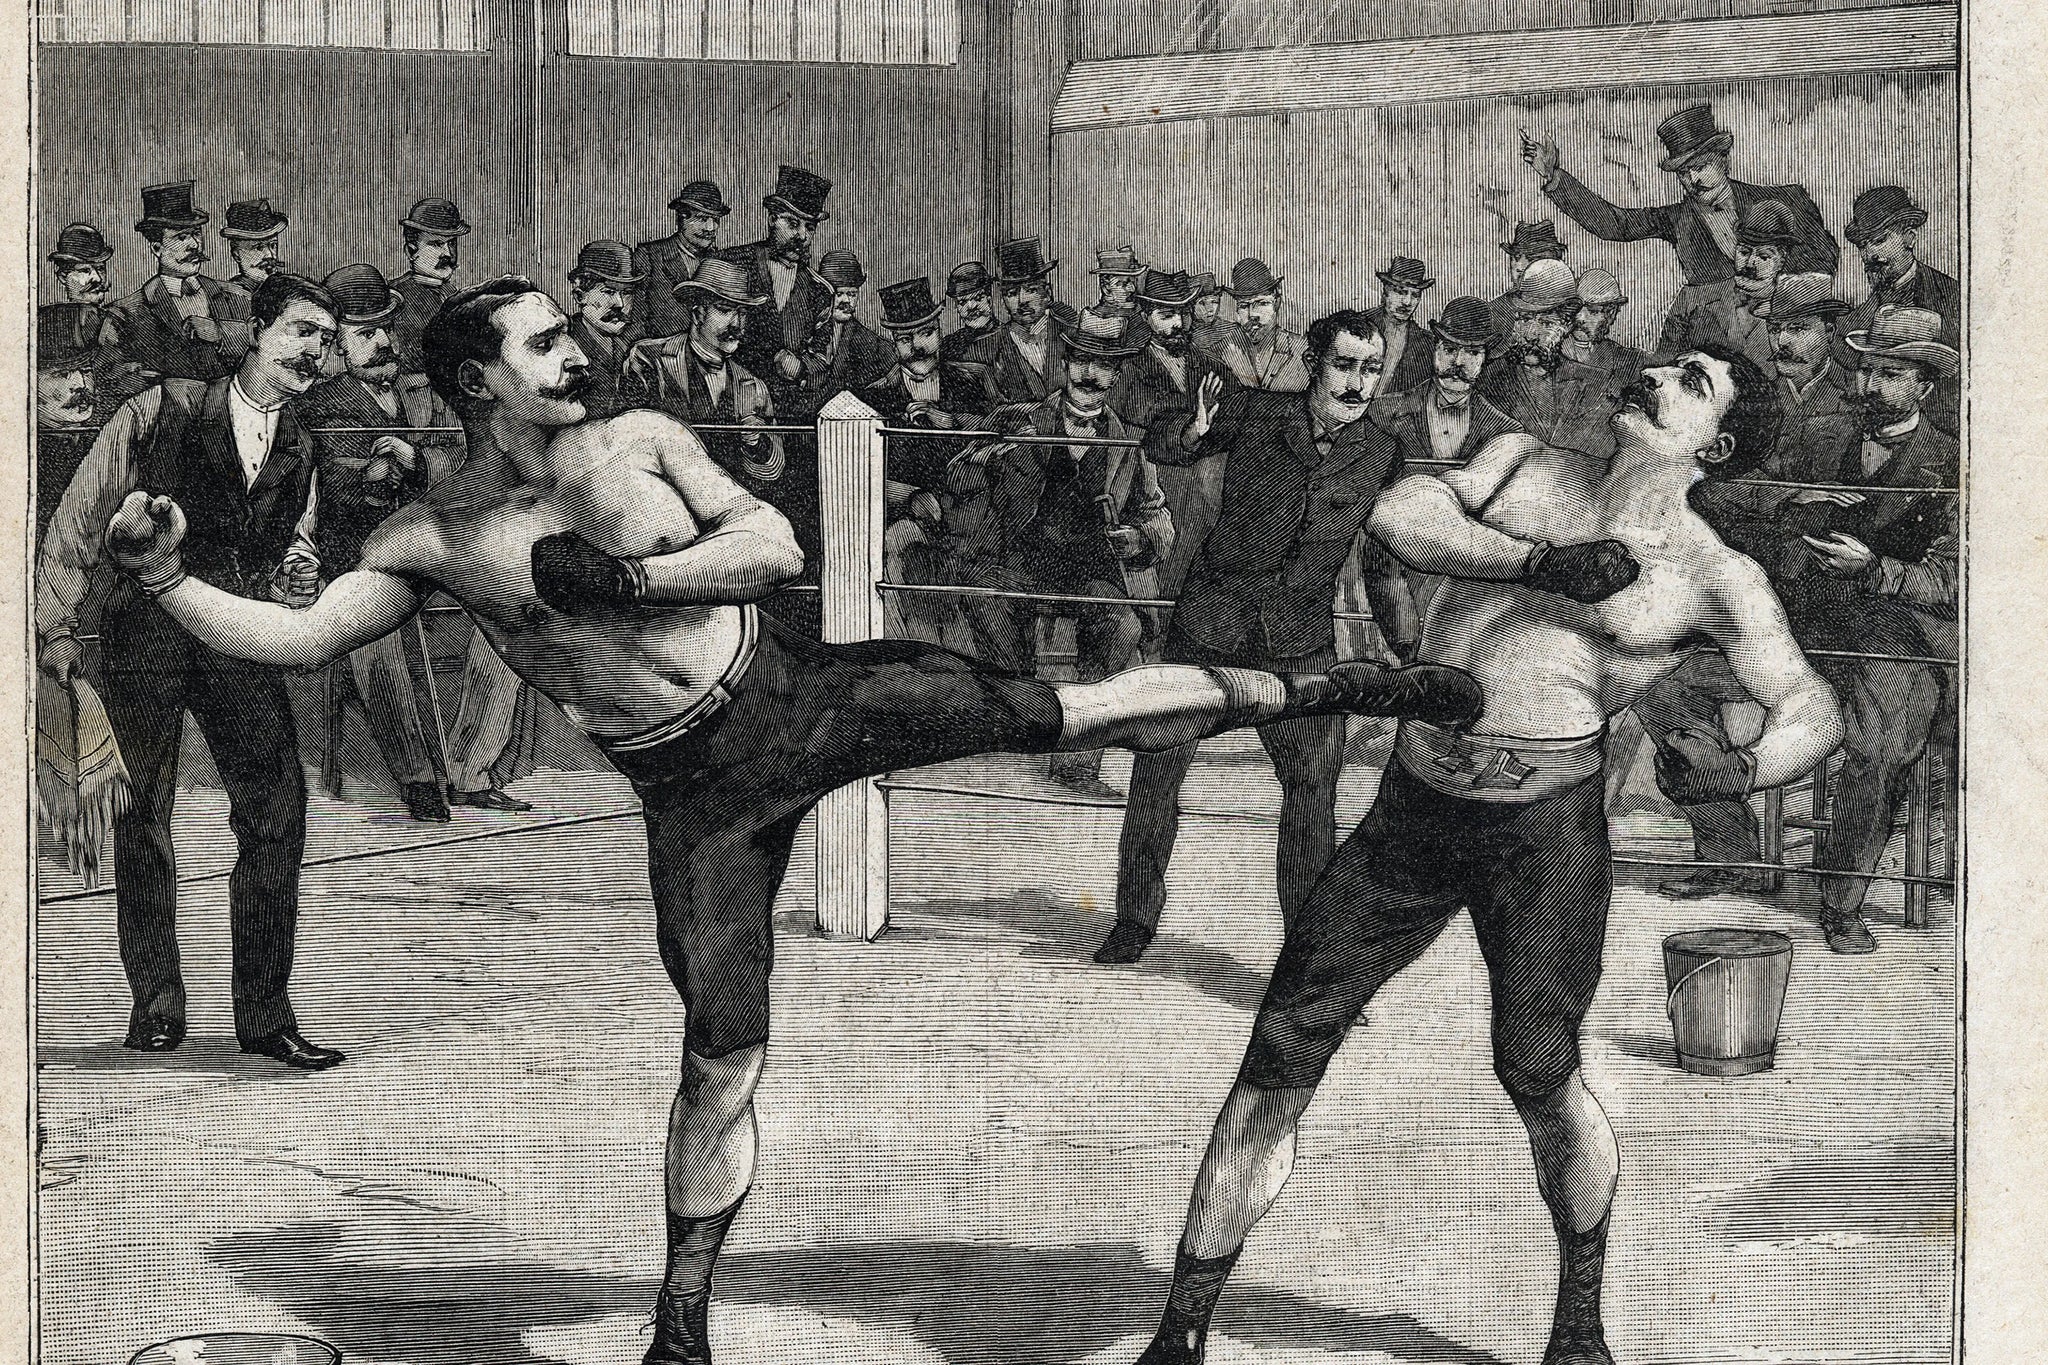 Savate: an ethical, aesthetic and efficient combat sport